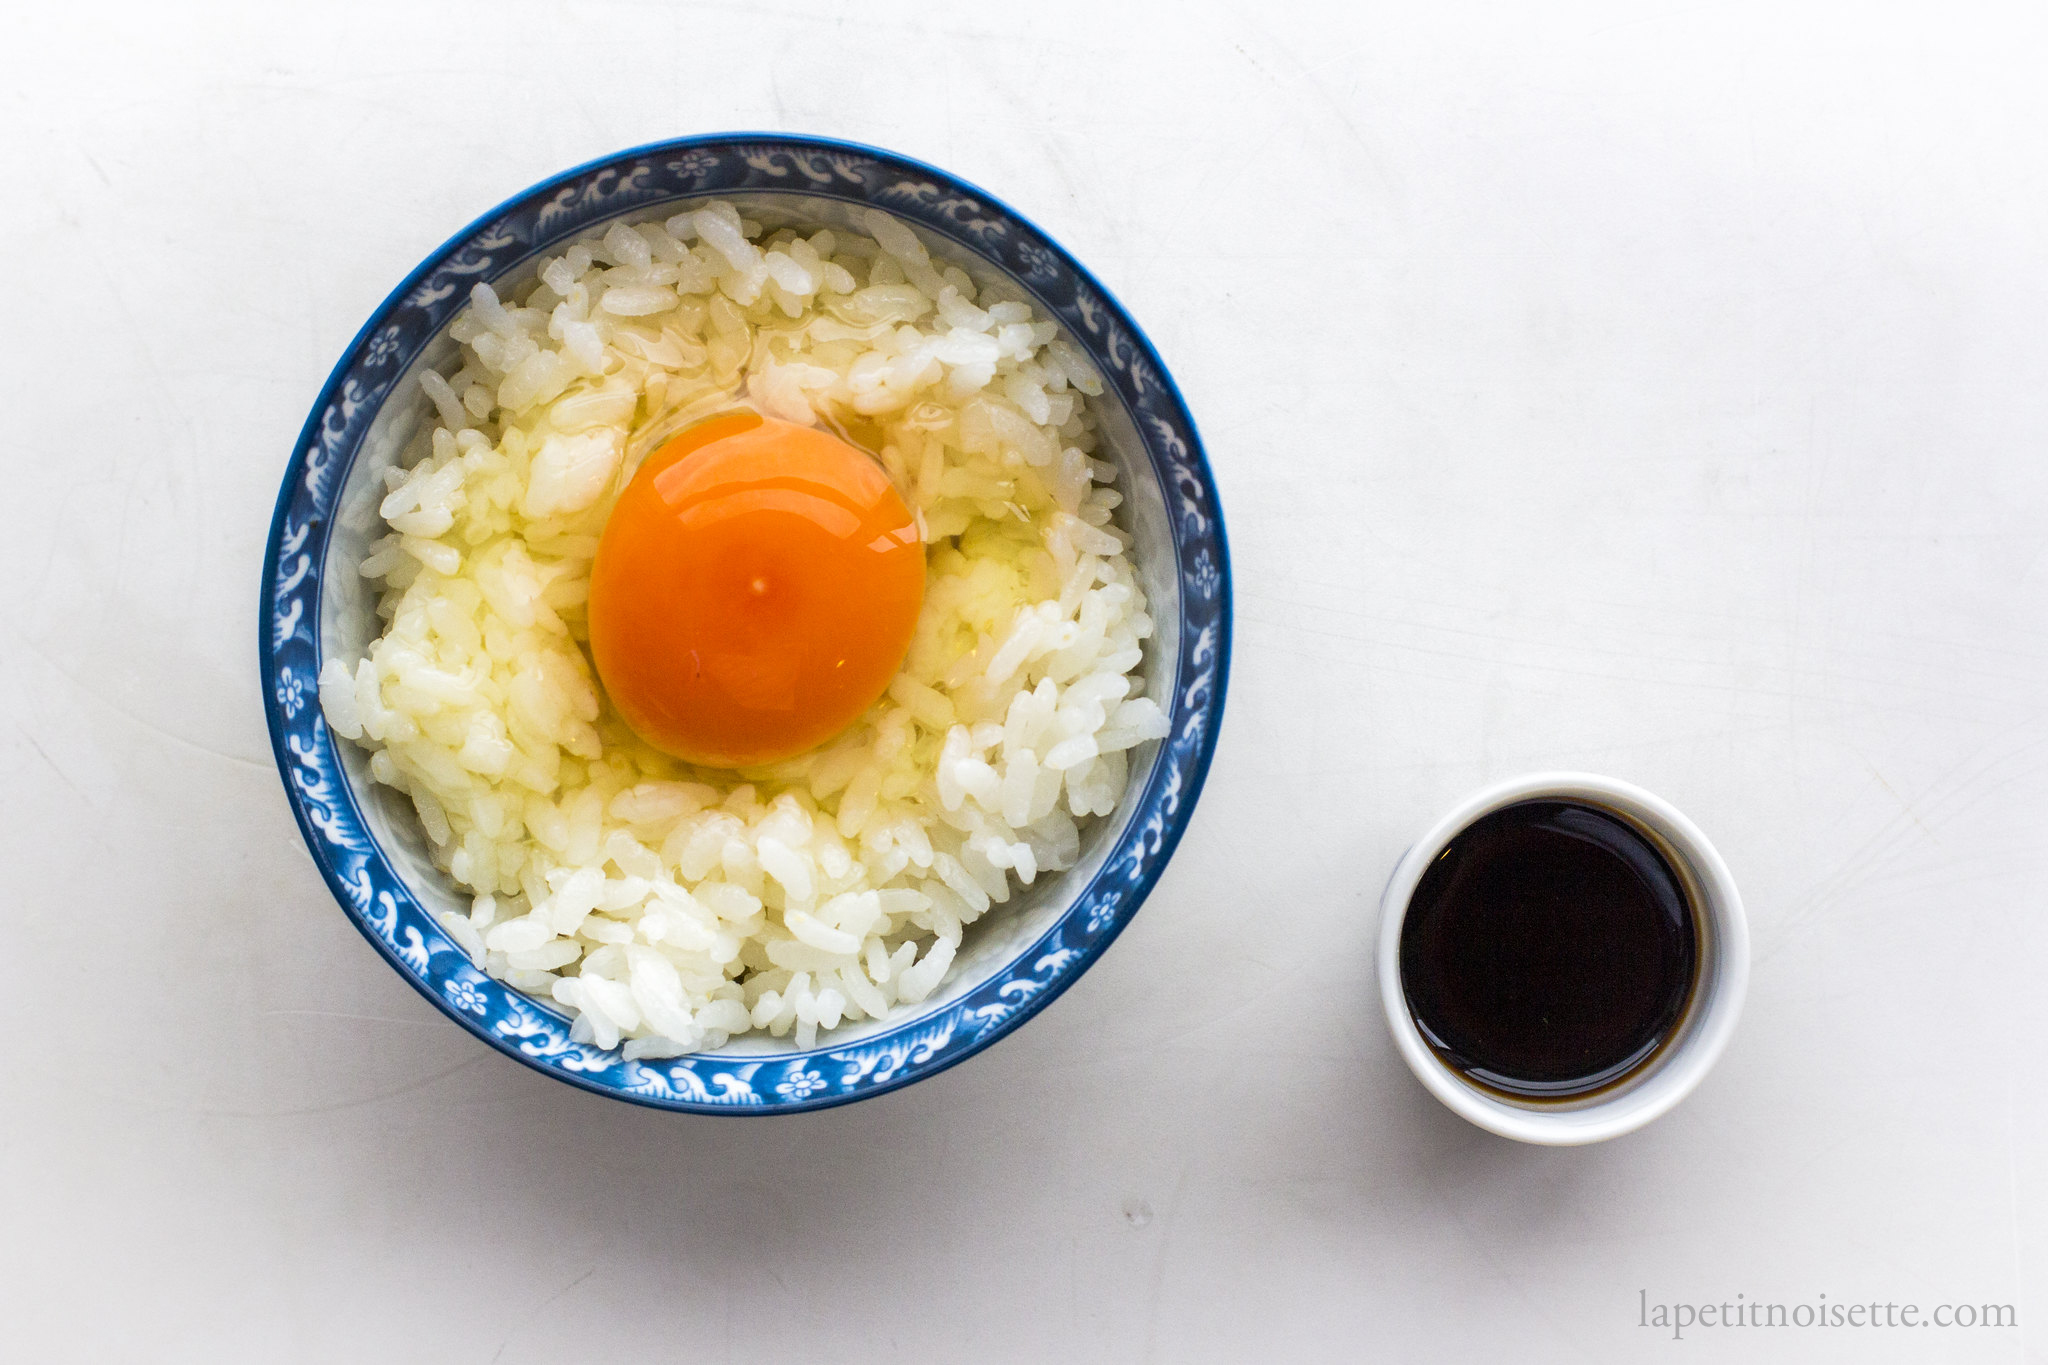 A traditional Japanese meal of raw egg over rice known as tamagokakegohan.